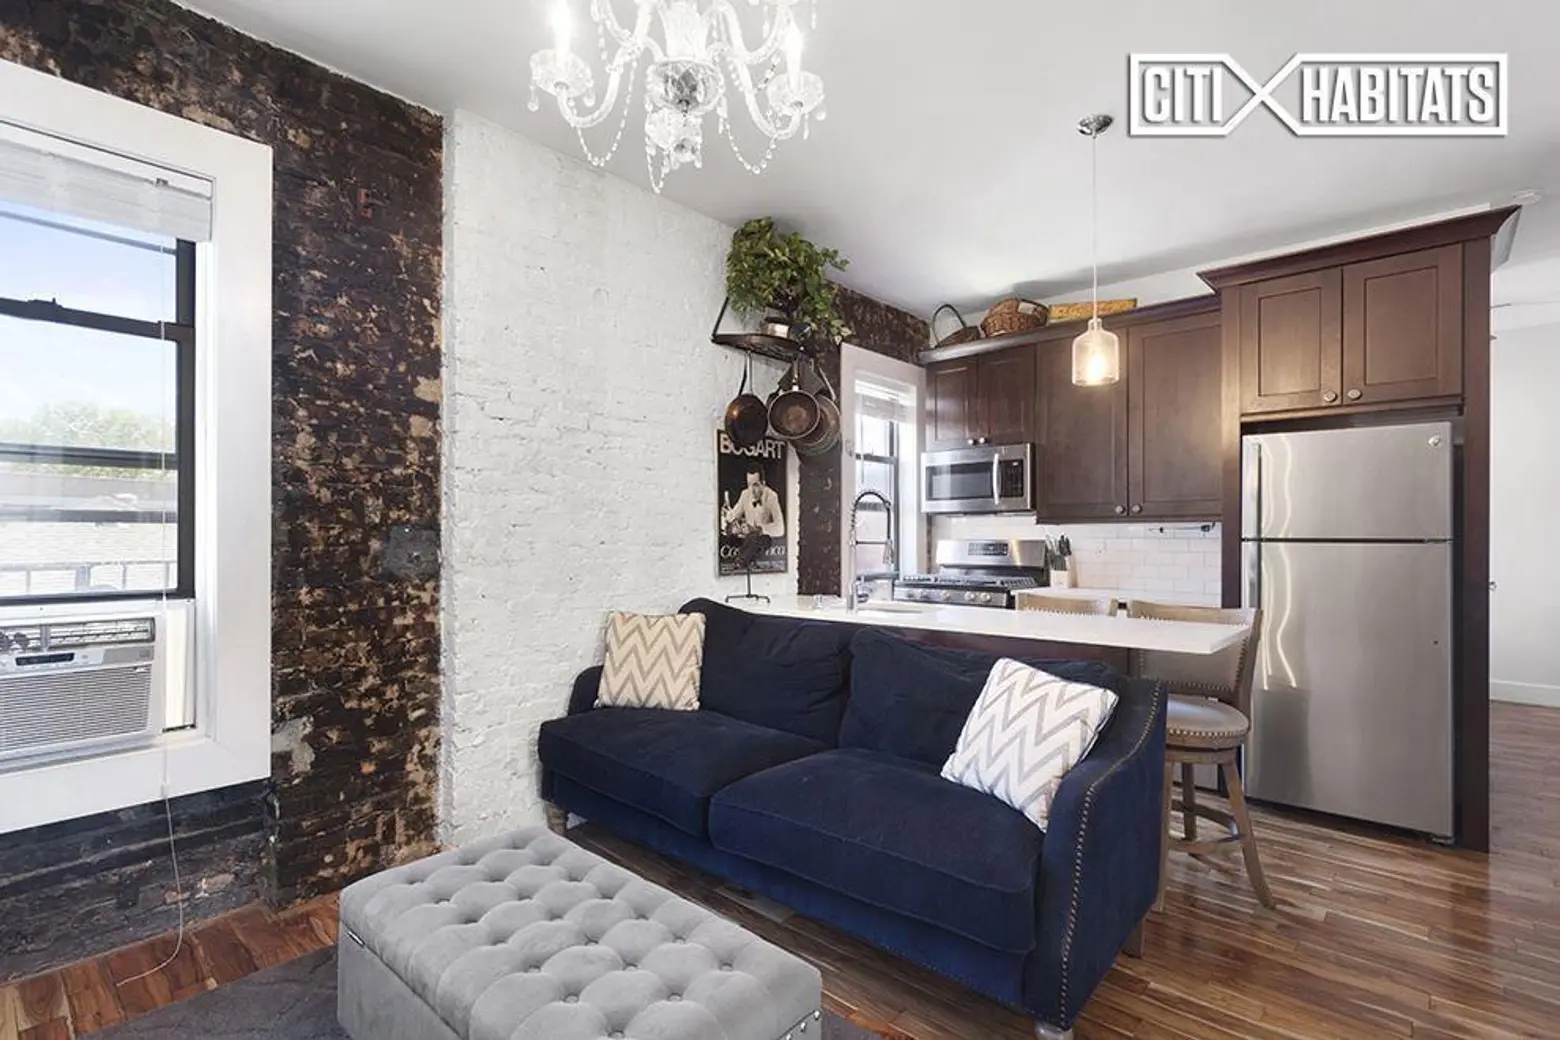 This little renovated slice of Williamsburg could be yours for $360K